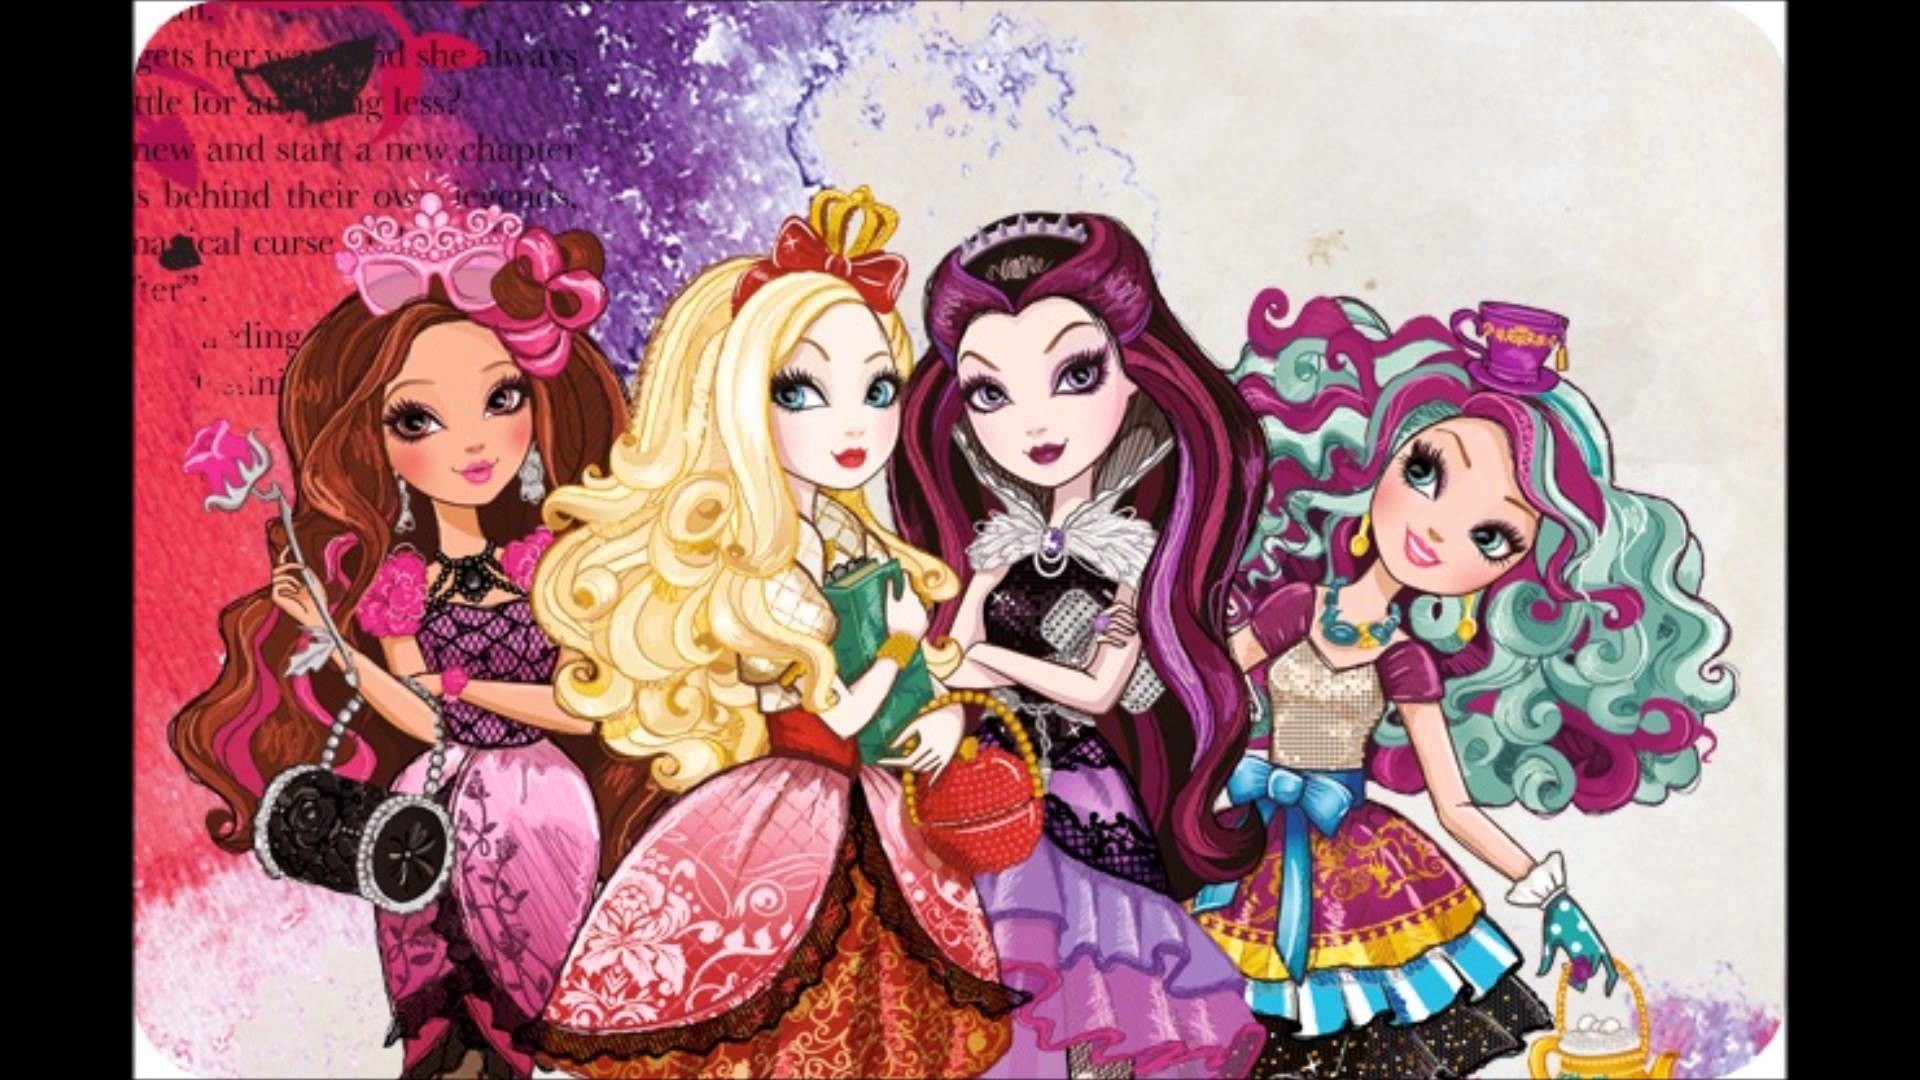 1920x1080 juliajody images Ever After High HD wallpaper and background photos